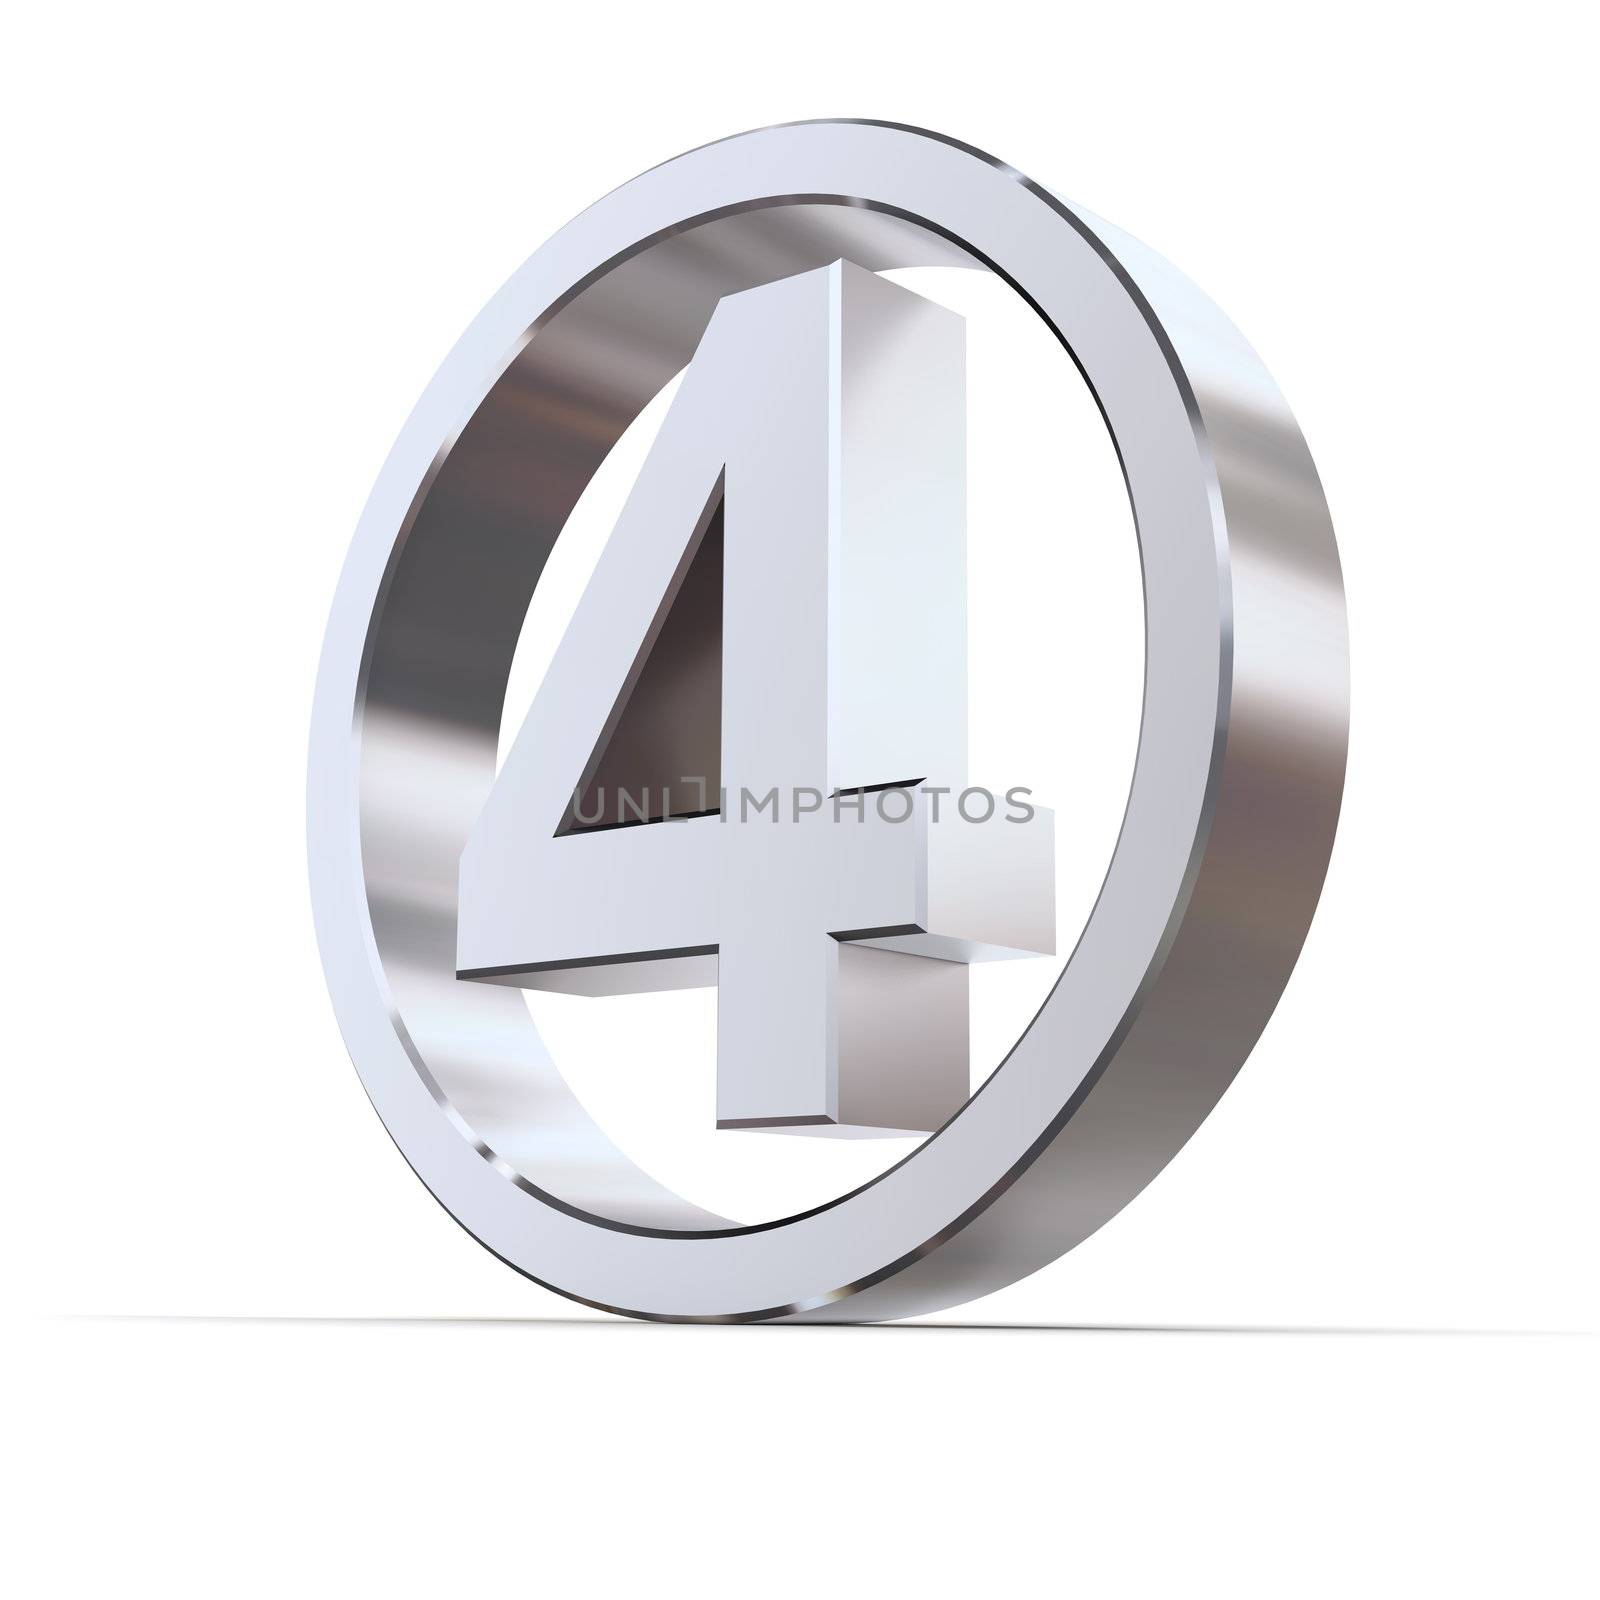 shiny 3d number 4 made of silver/chrome in a metallic circle